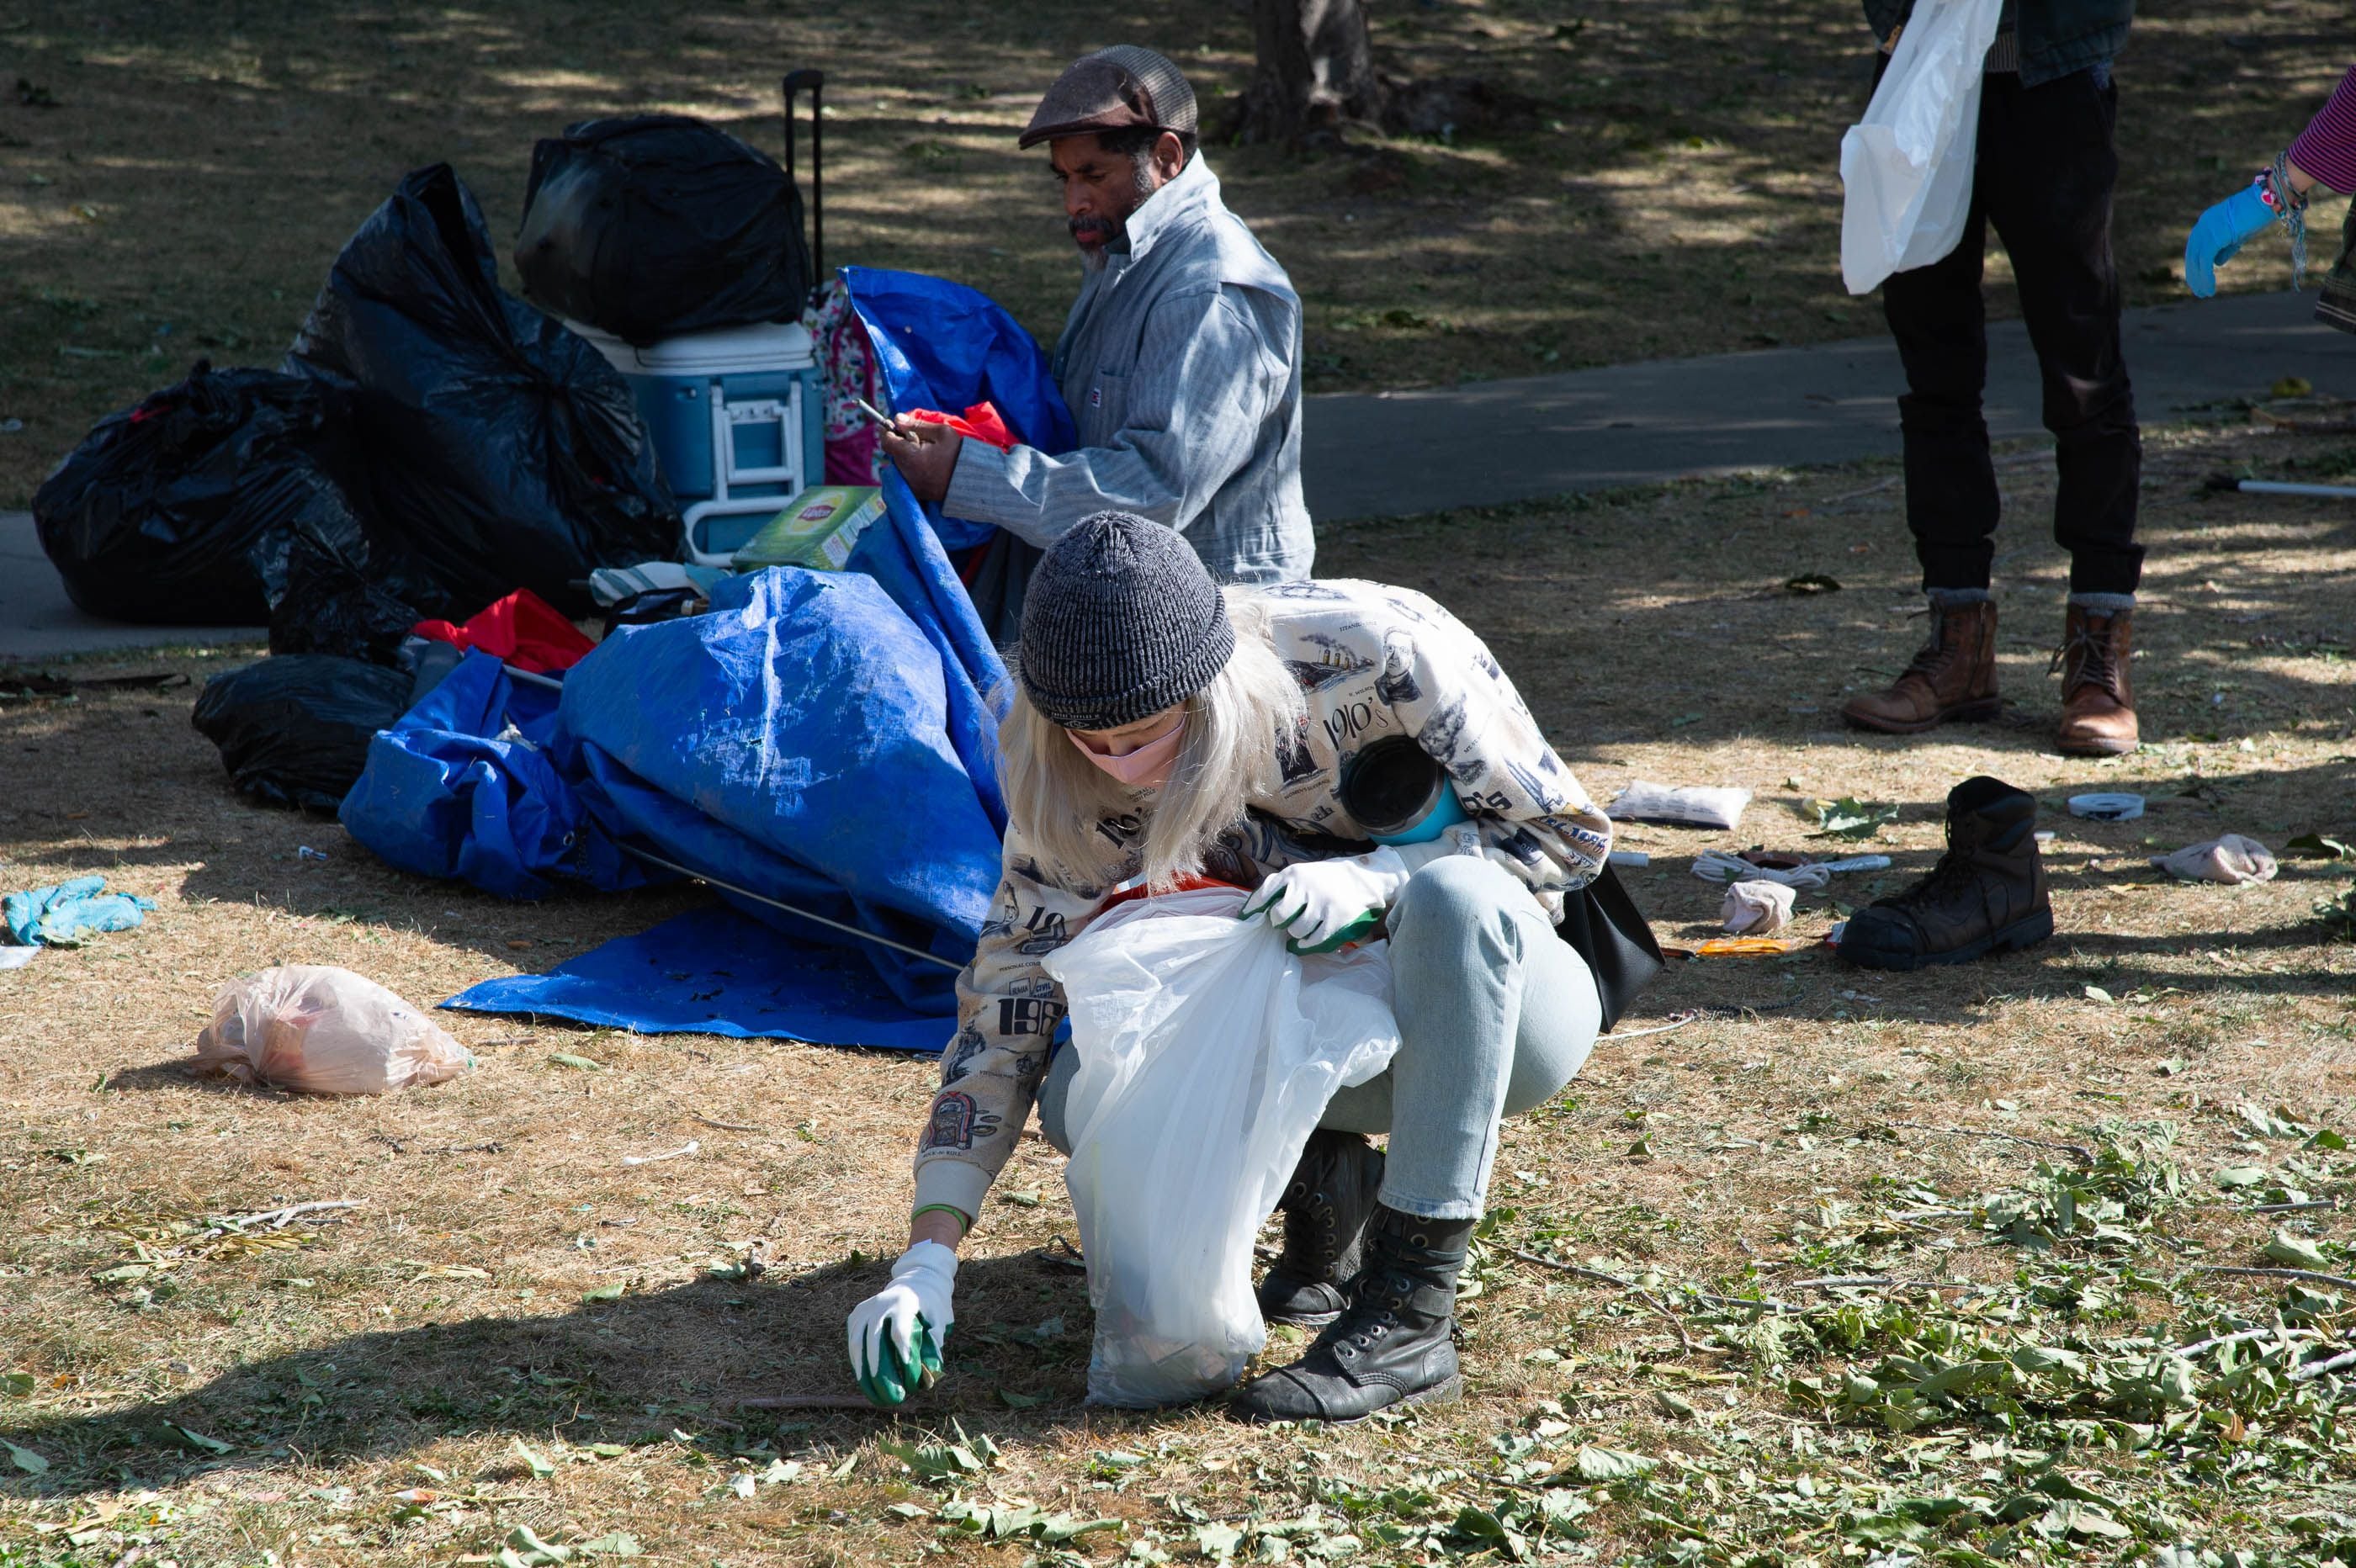 (Francisco Kjolseth  |  The Salt Lake Tribune) Homeless advocate volunteers lend their support by cleaning up trash as the Salt Lake County Health Department, backed by police, force a clean up of homeless camps near Taufer Park in Salt Lake City on Thursday, Sept. 10, 2020.